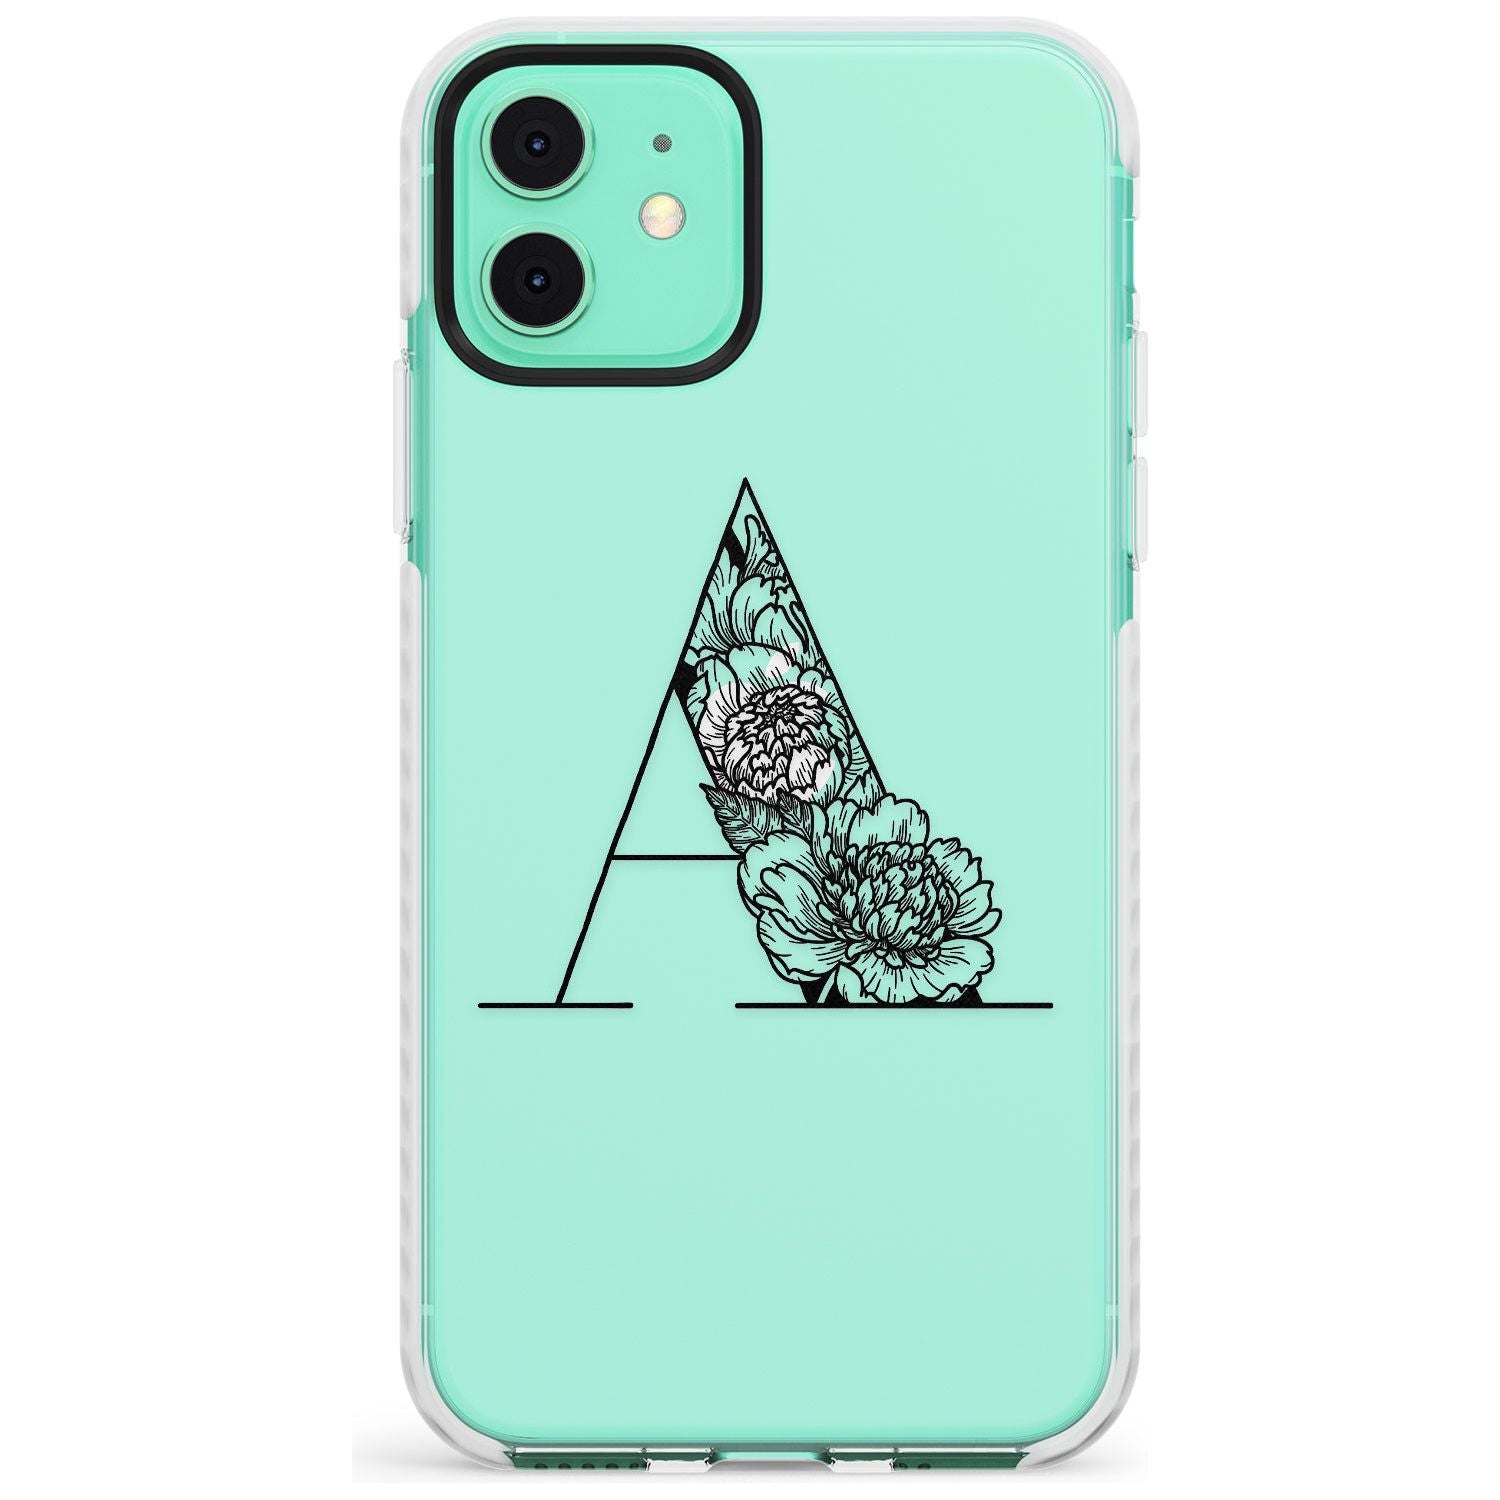 Floral Monogram Letter Slim TPU Phone Case for iPhone 11